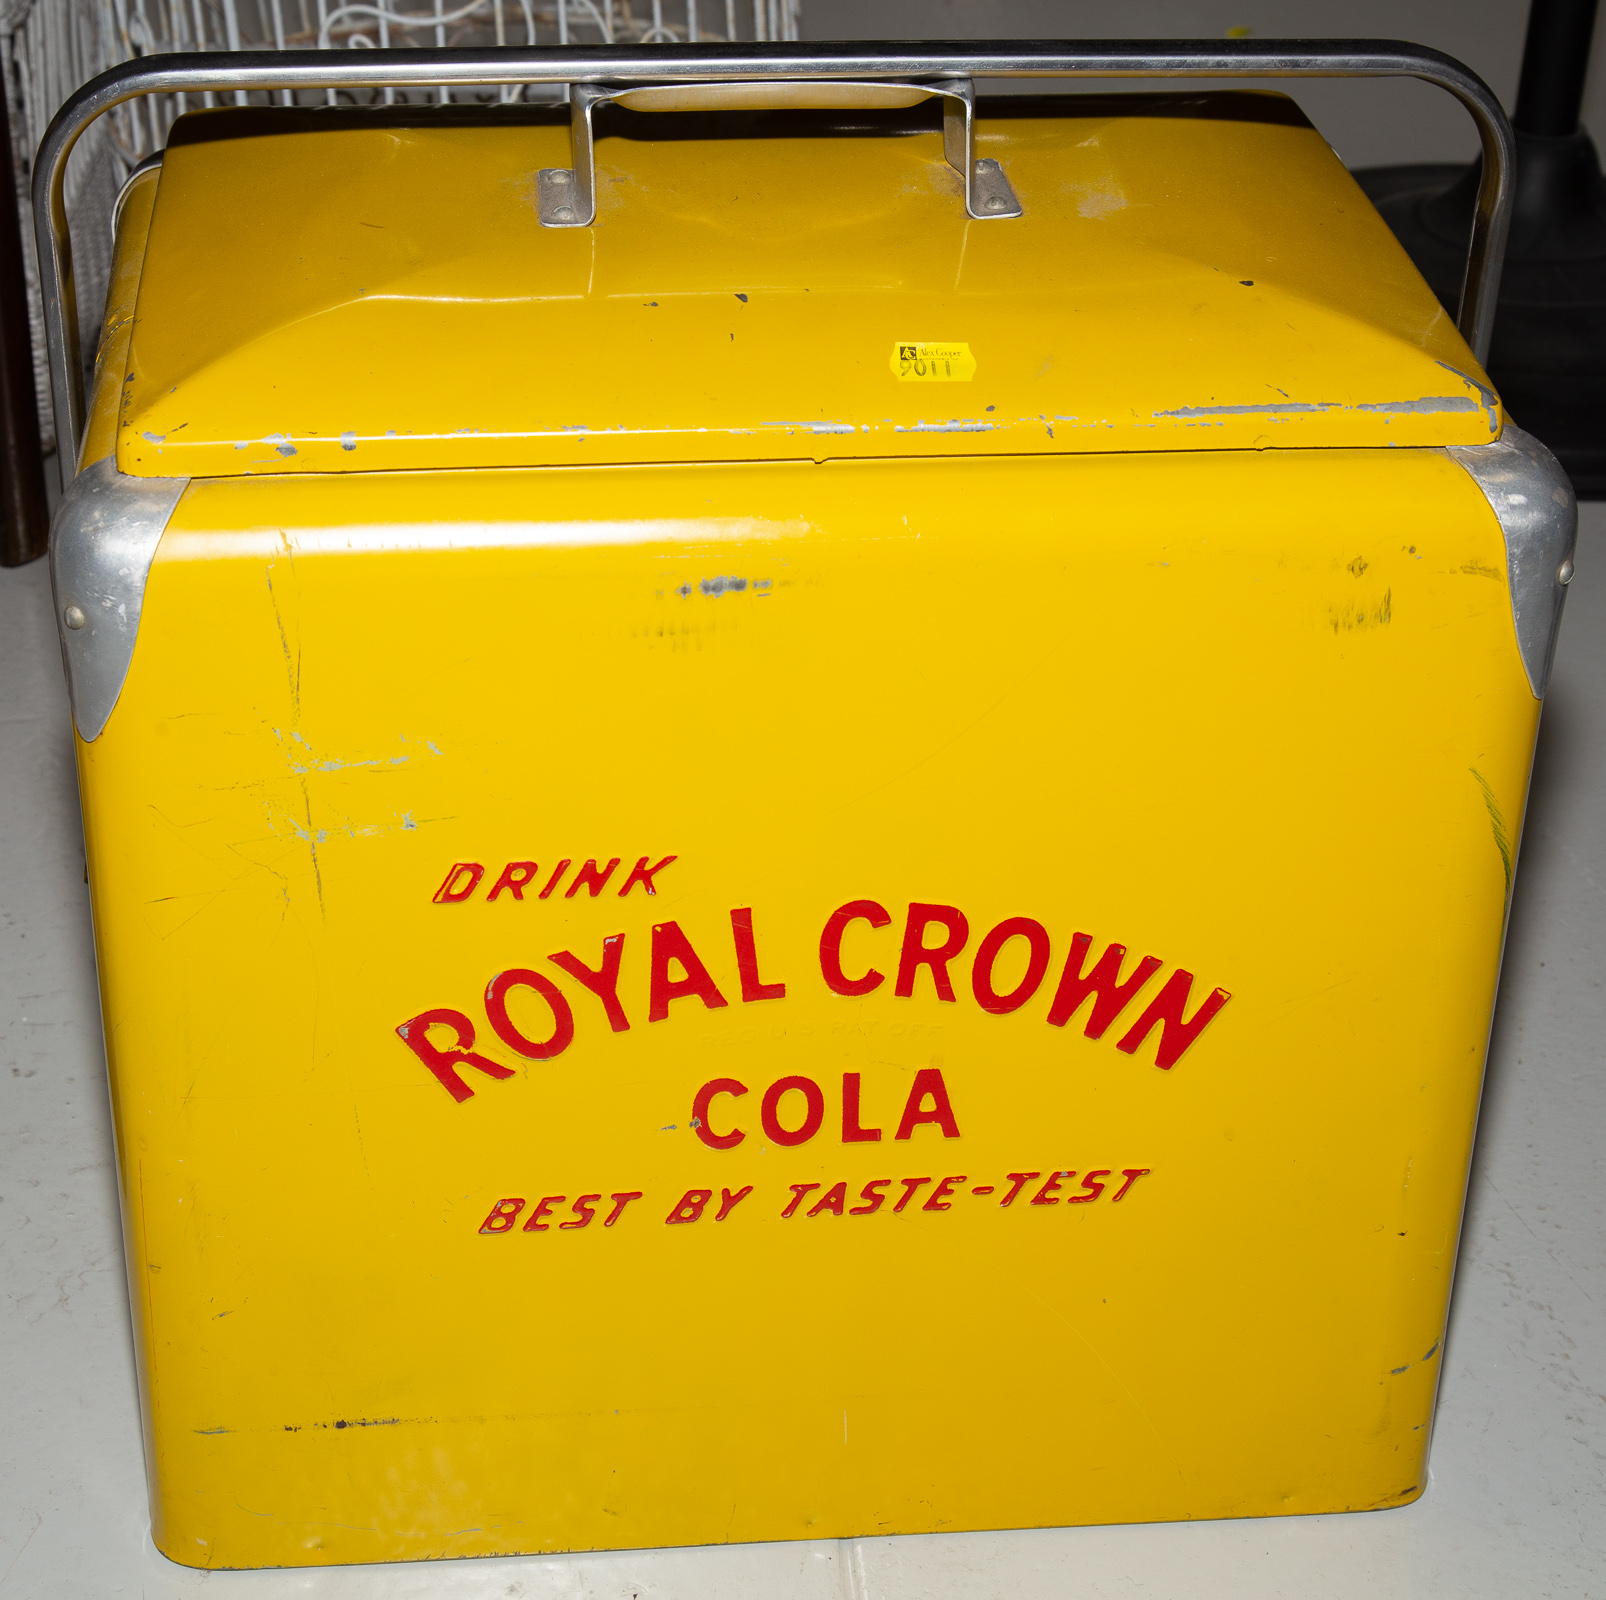 ROYAL CROWN COLA COOLER Possible early